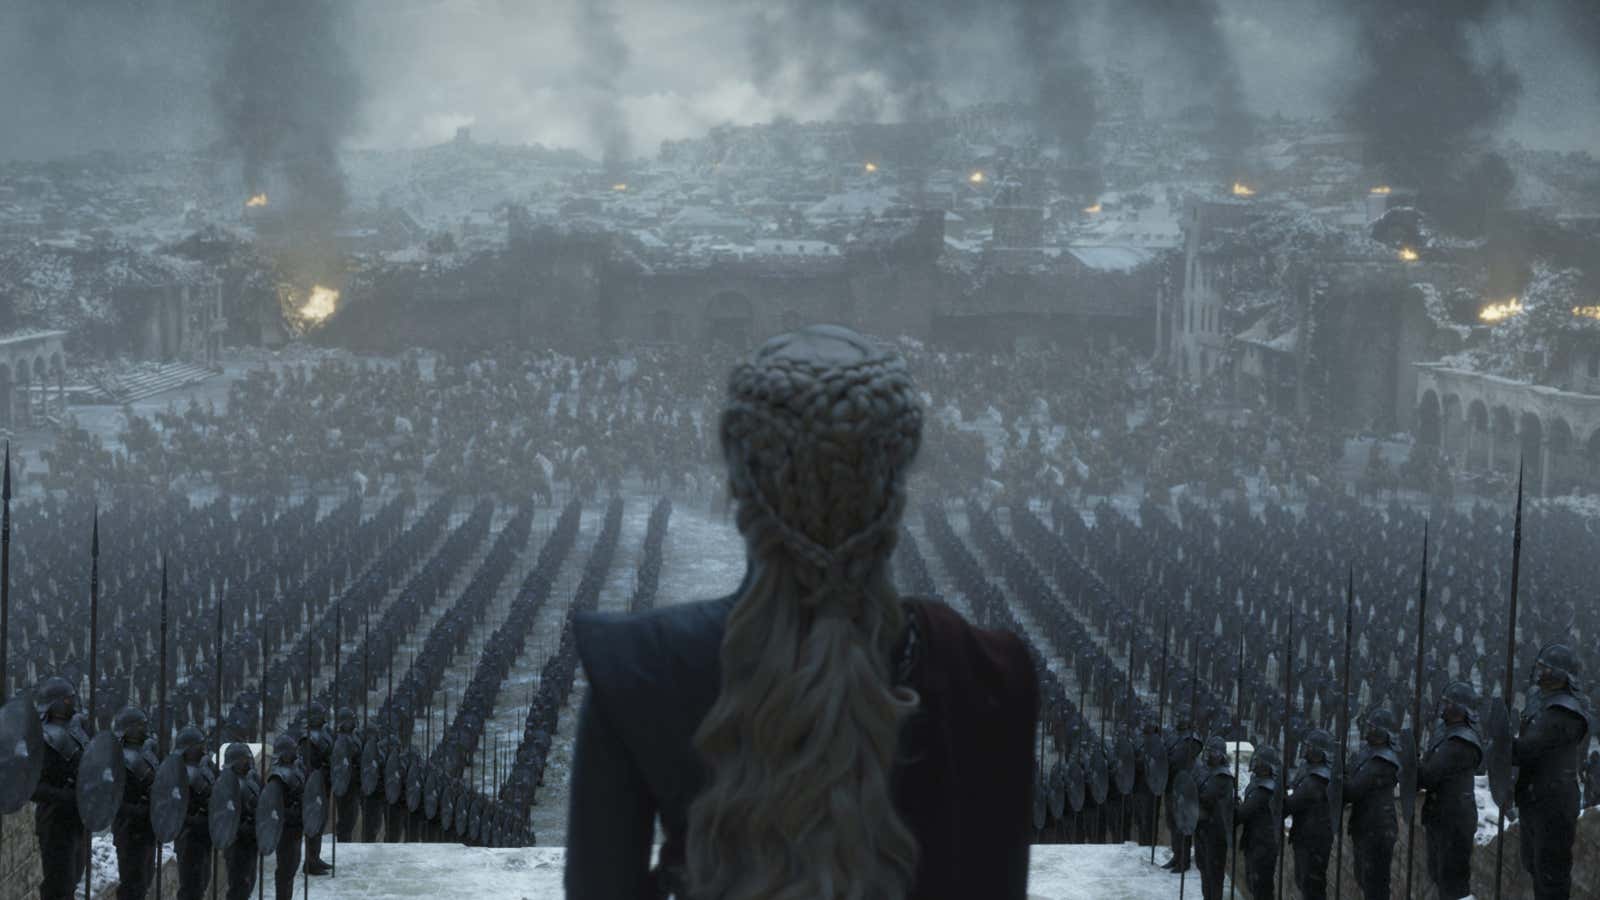 “Game of Thrones” has one more Emmys to reign supreme.